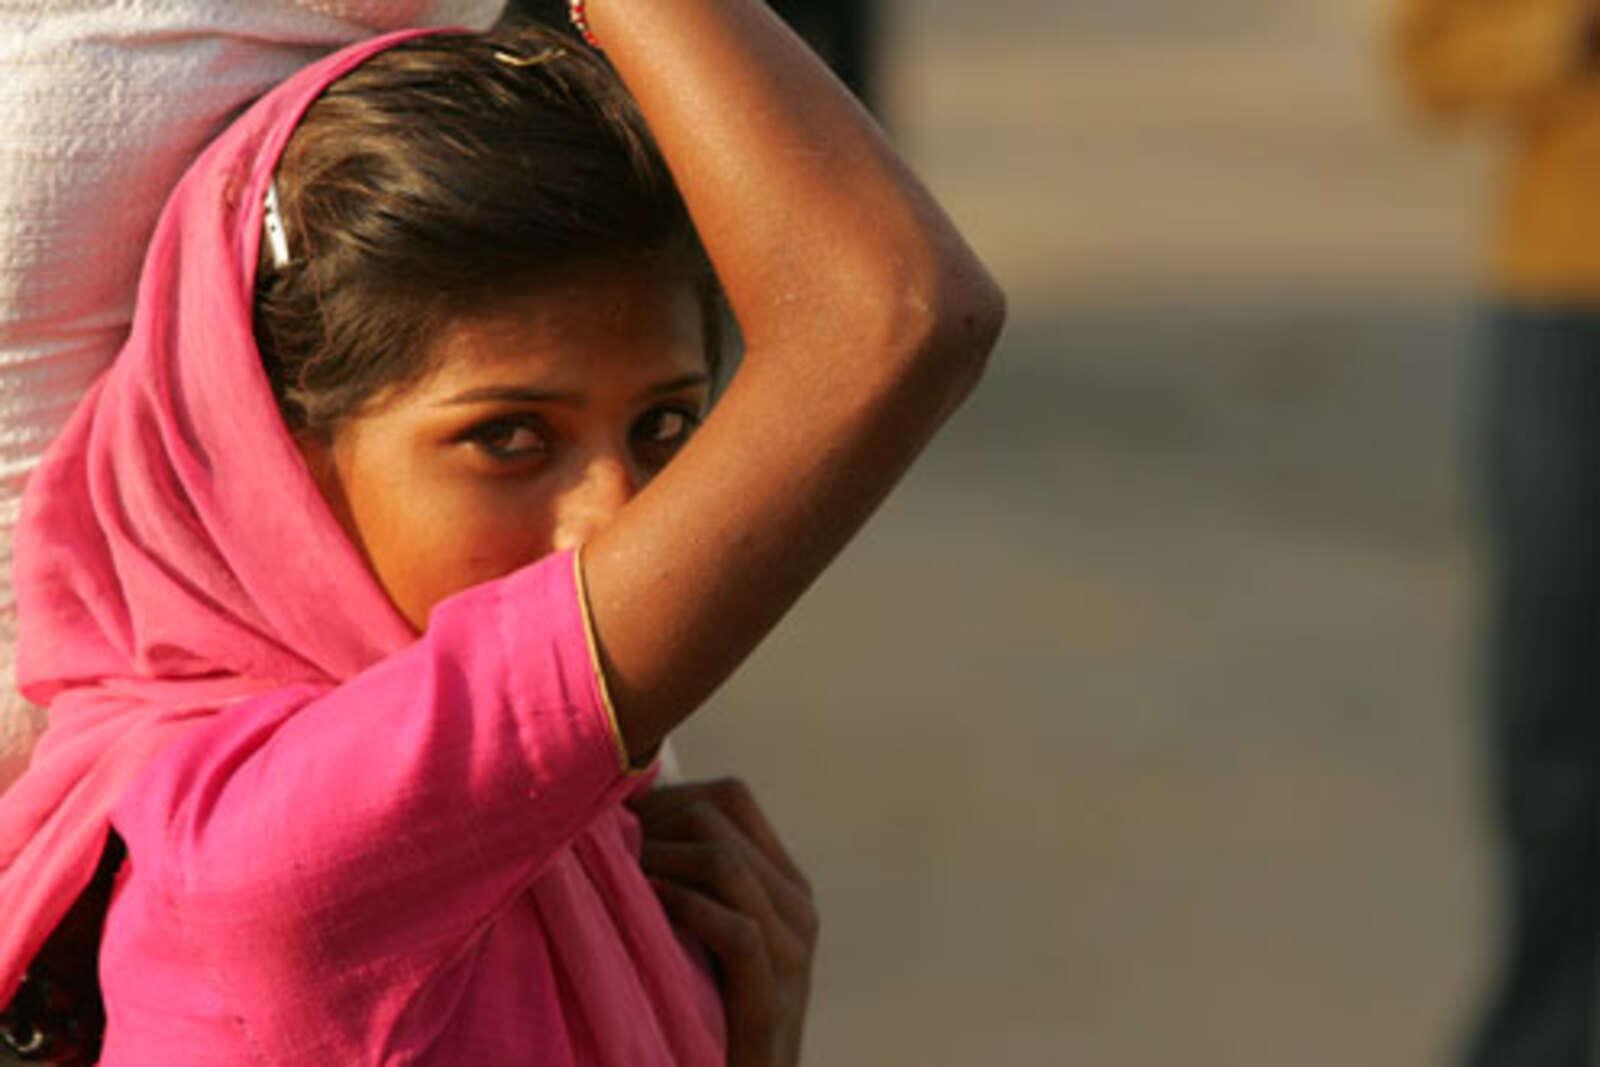 A young Indian girl carries a sack.